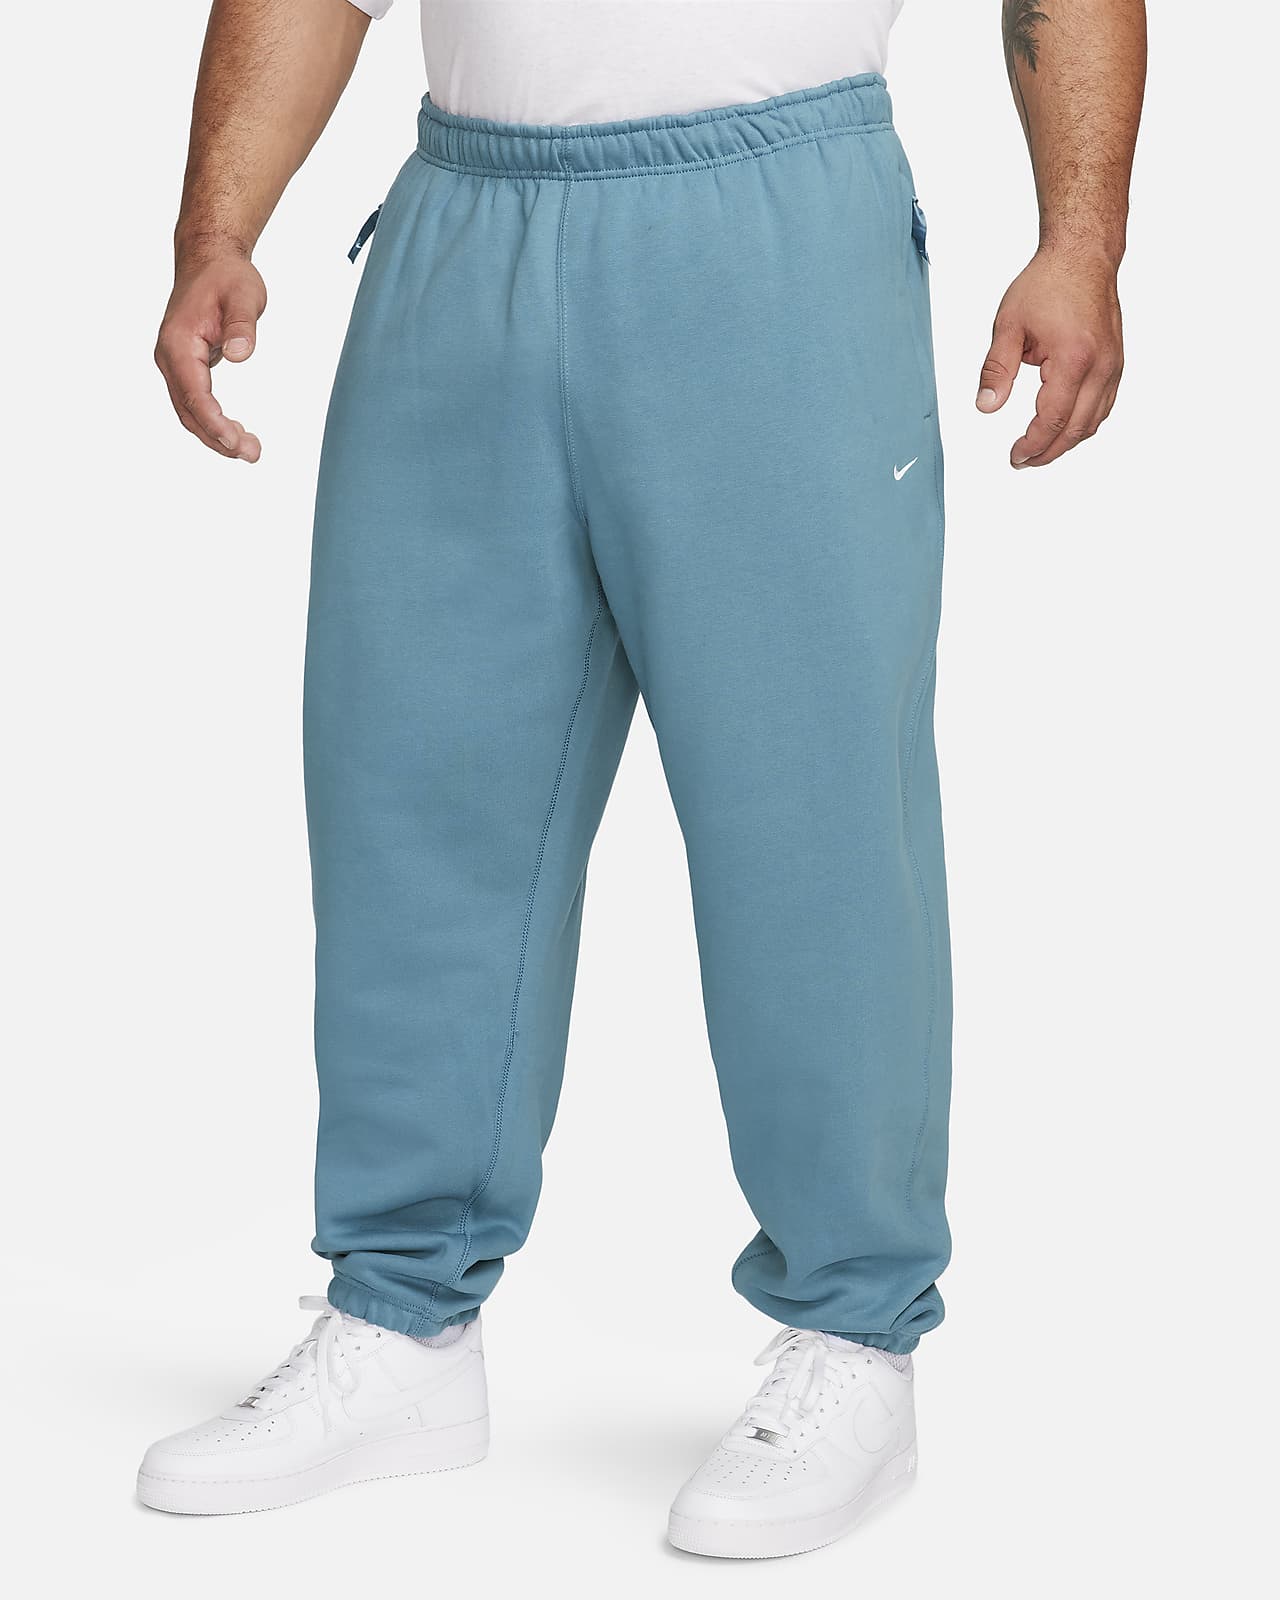 https://static.nike.com/a/images/t_PDP_1280_v1/f_auto,q_auto:eco/fa94ac4b-a4ed-4ad3-a709-43c215597bfe/solo-swoosh-fleece-trousers-GwtDSS.png